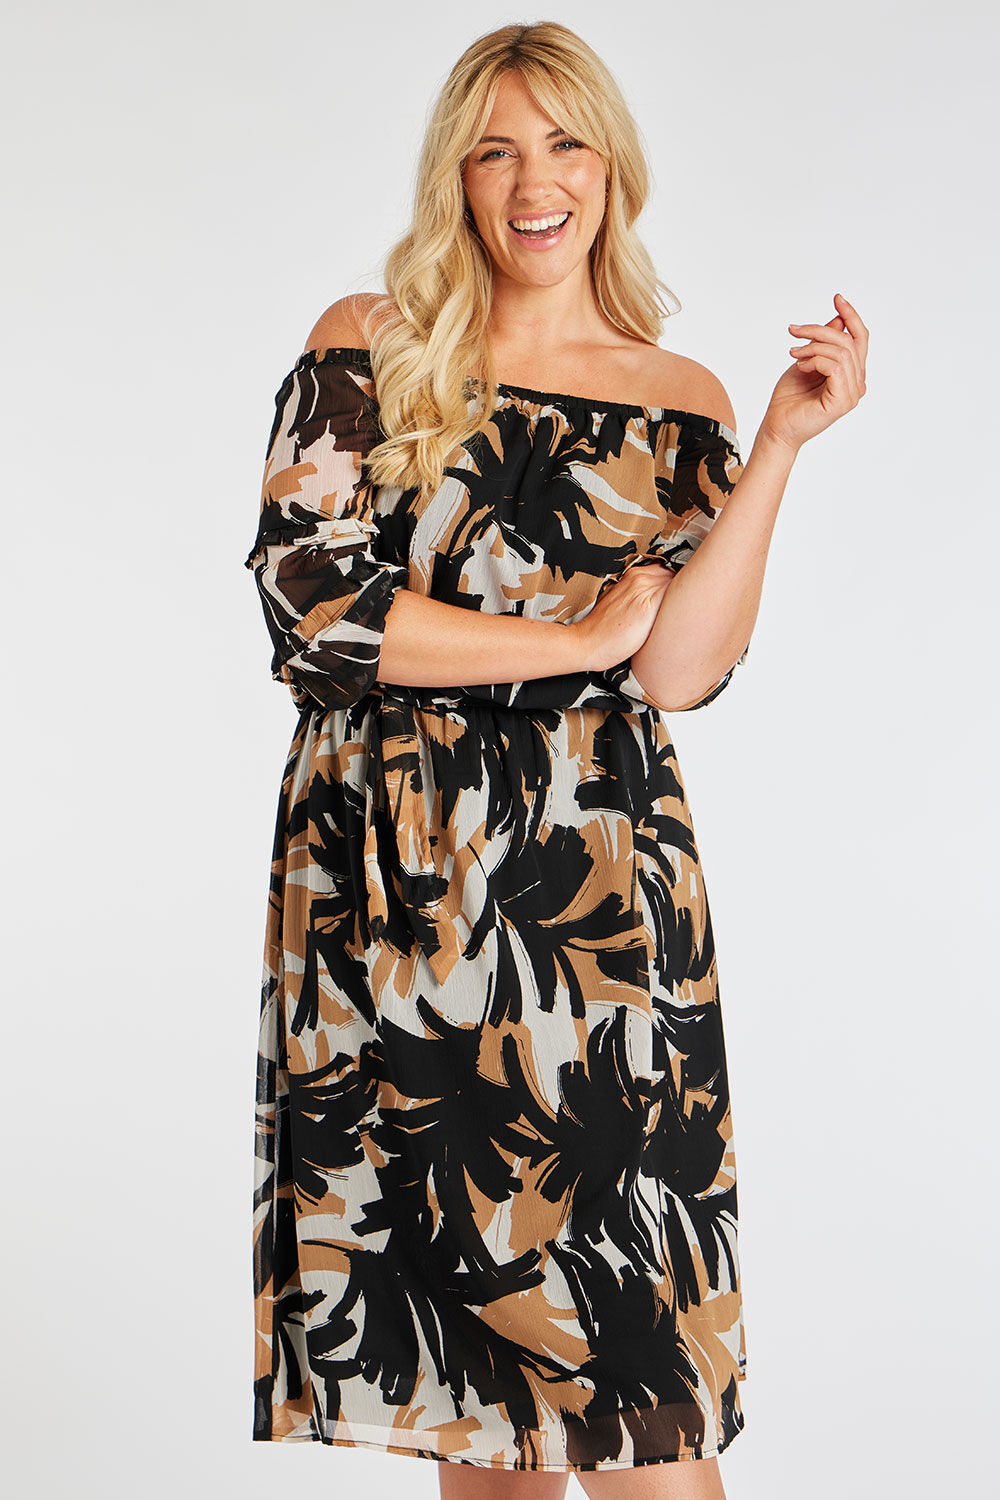 Bonmarche Black Abstract Print Bardot Dress With Ruffle Sleeves, Size: 10